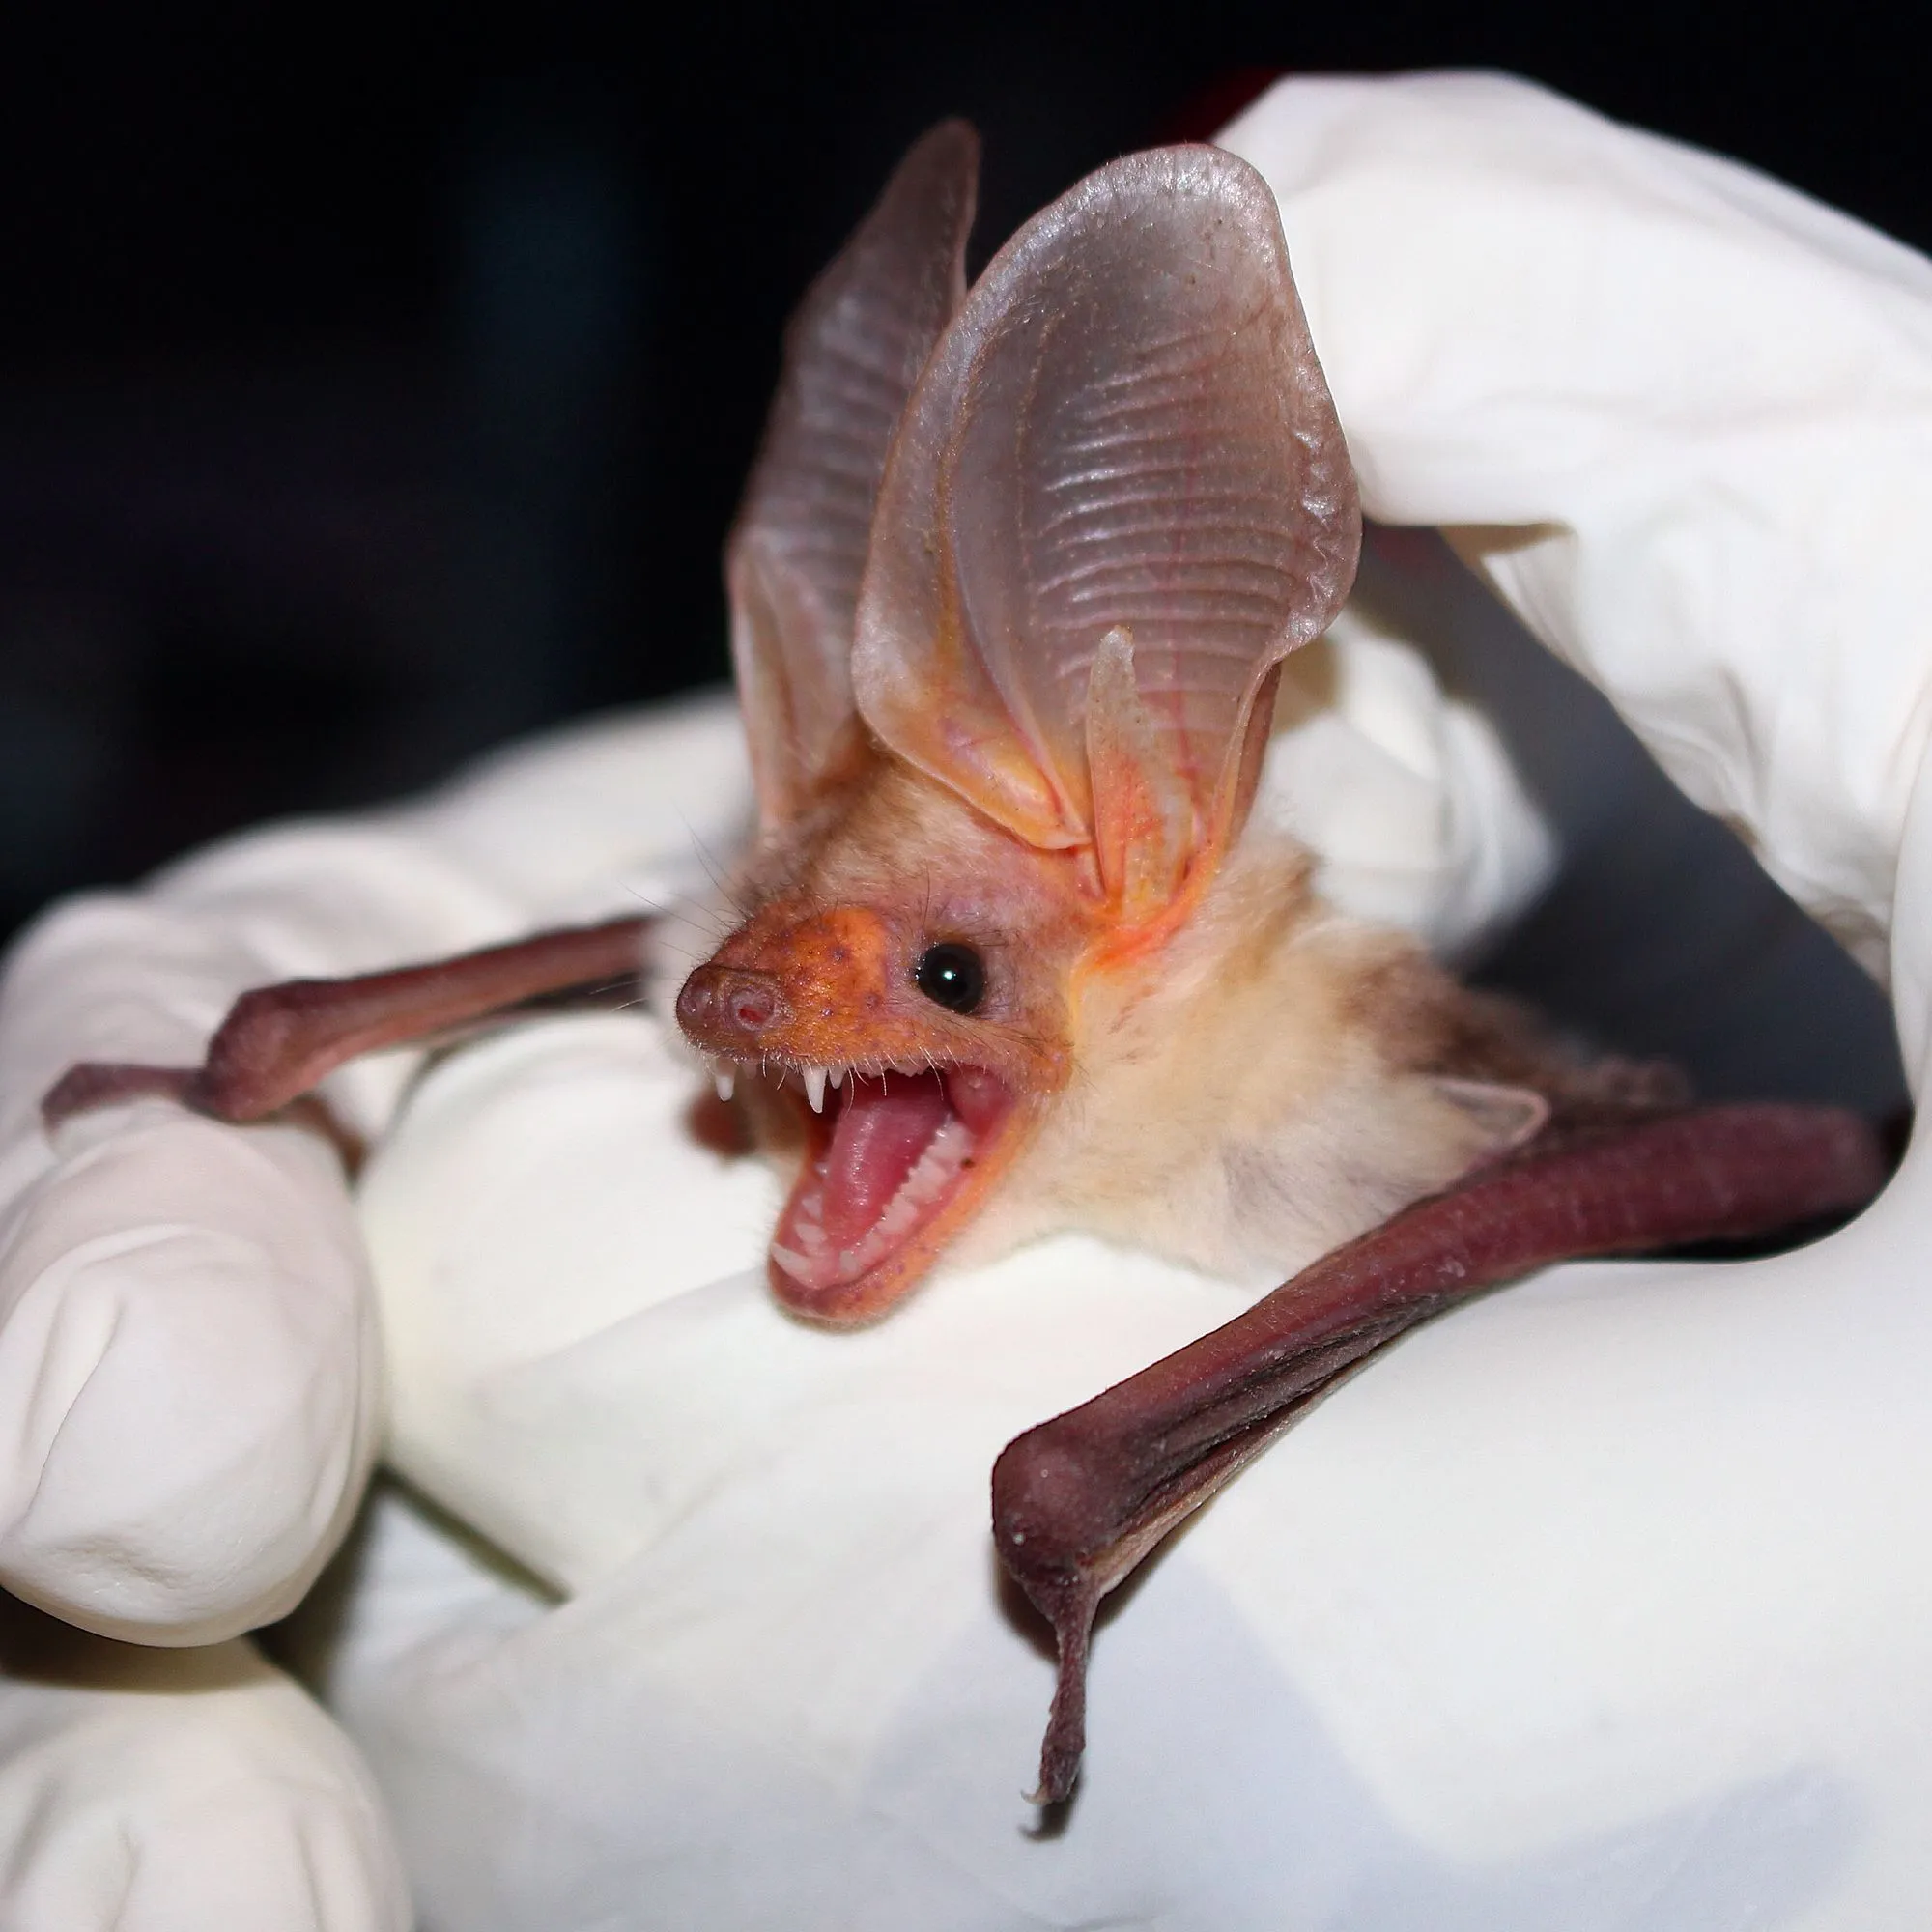 Read more about the amazing pallid bats in this article.